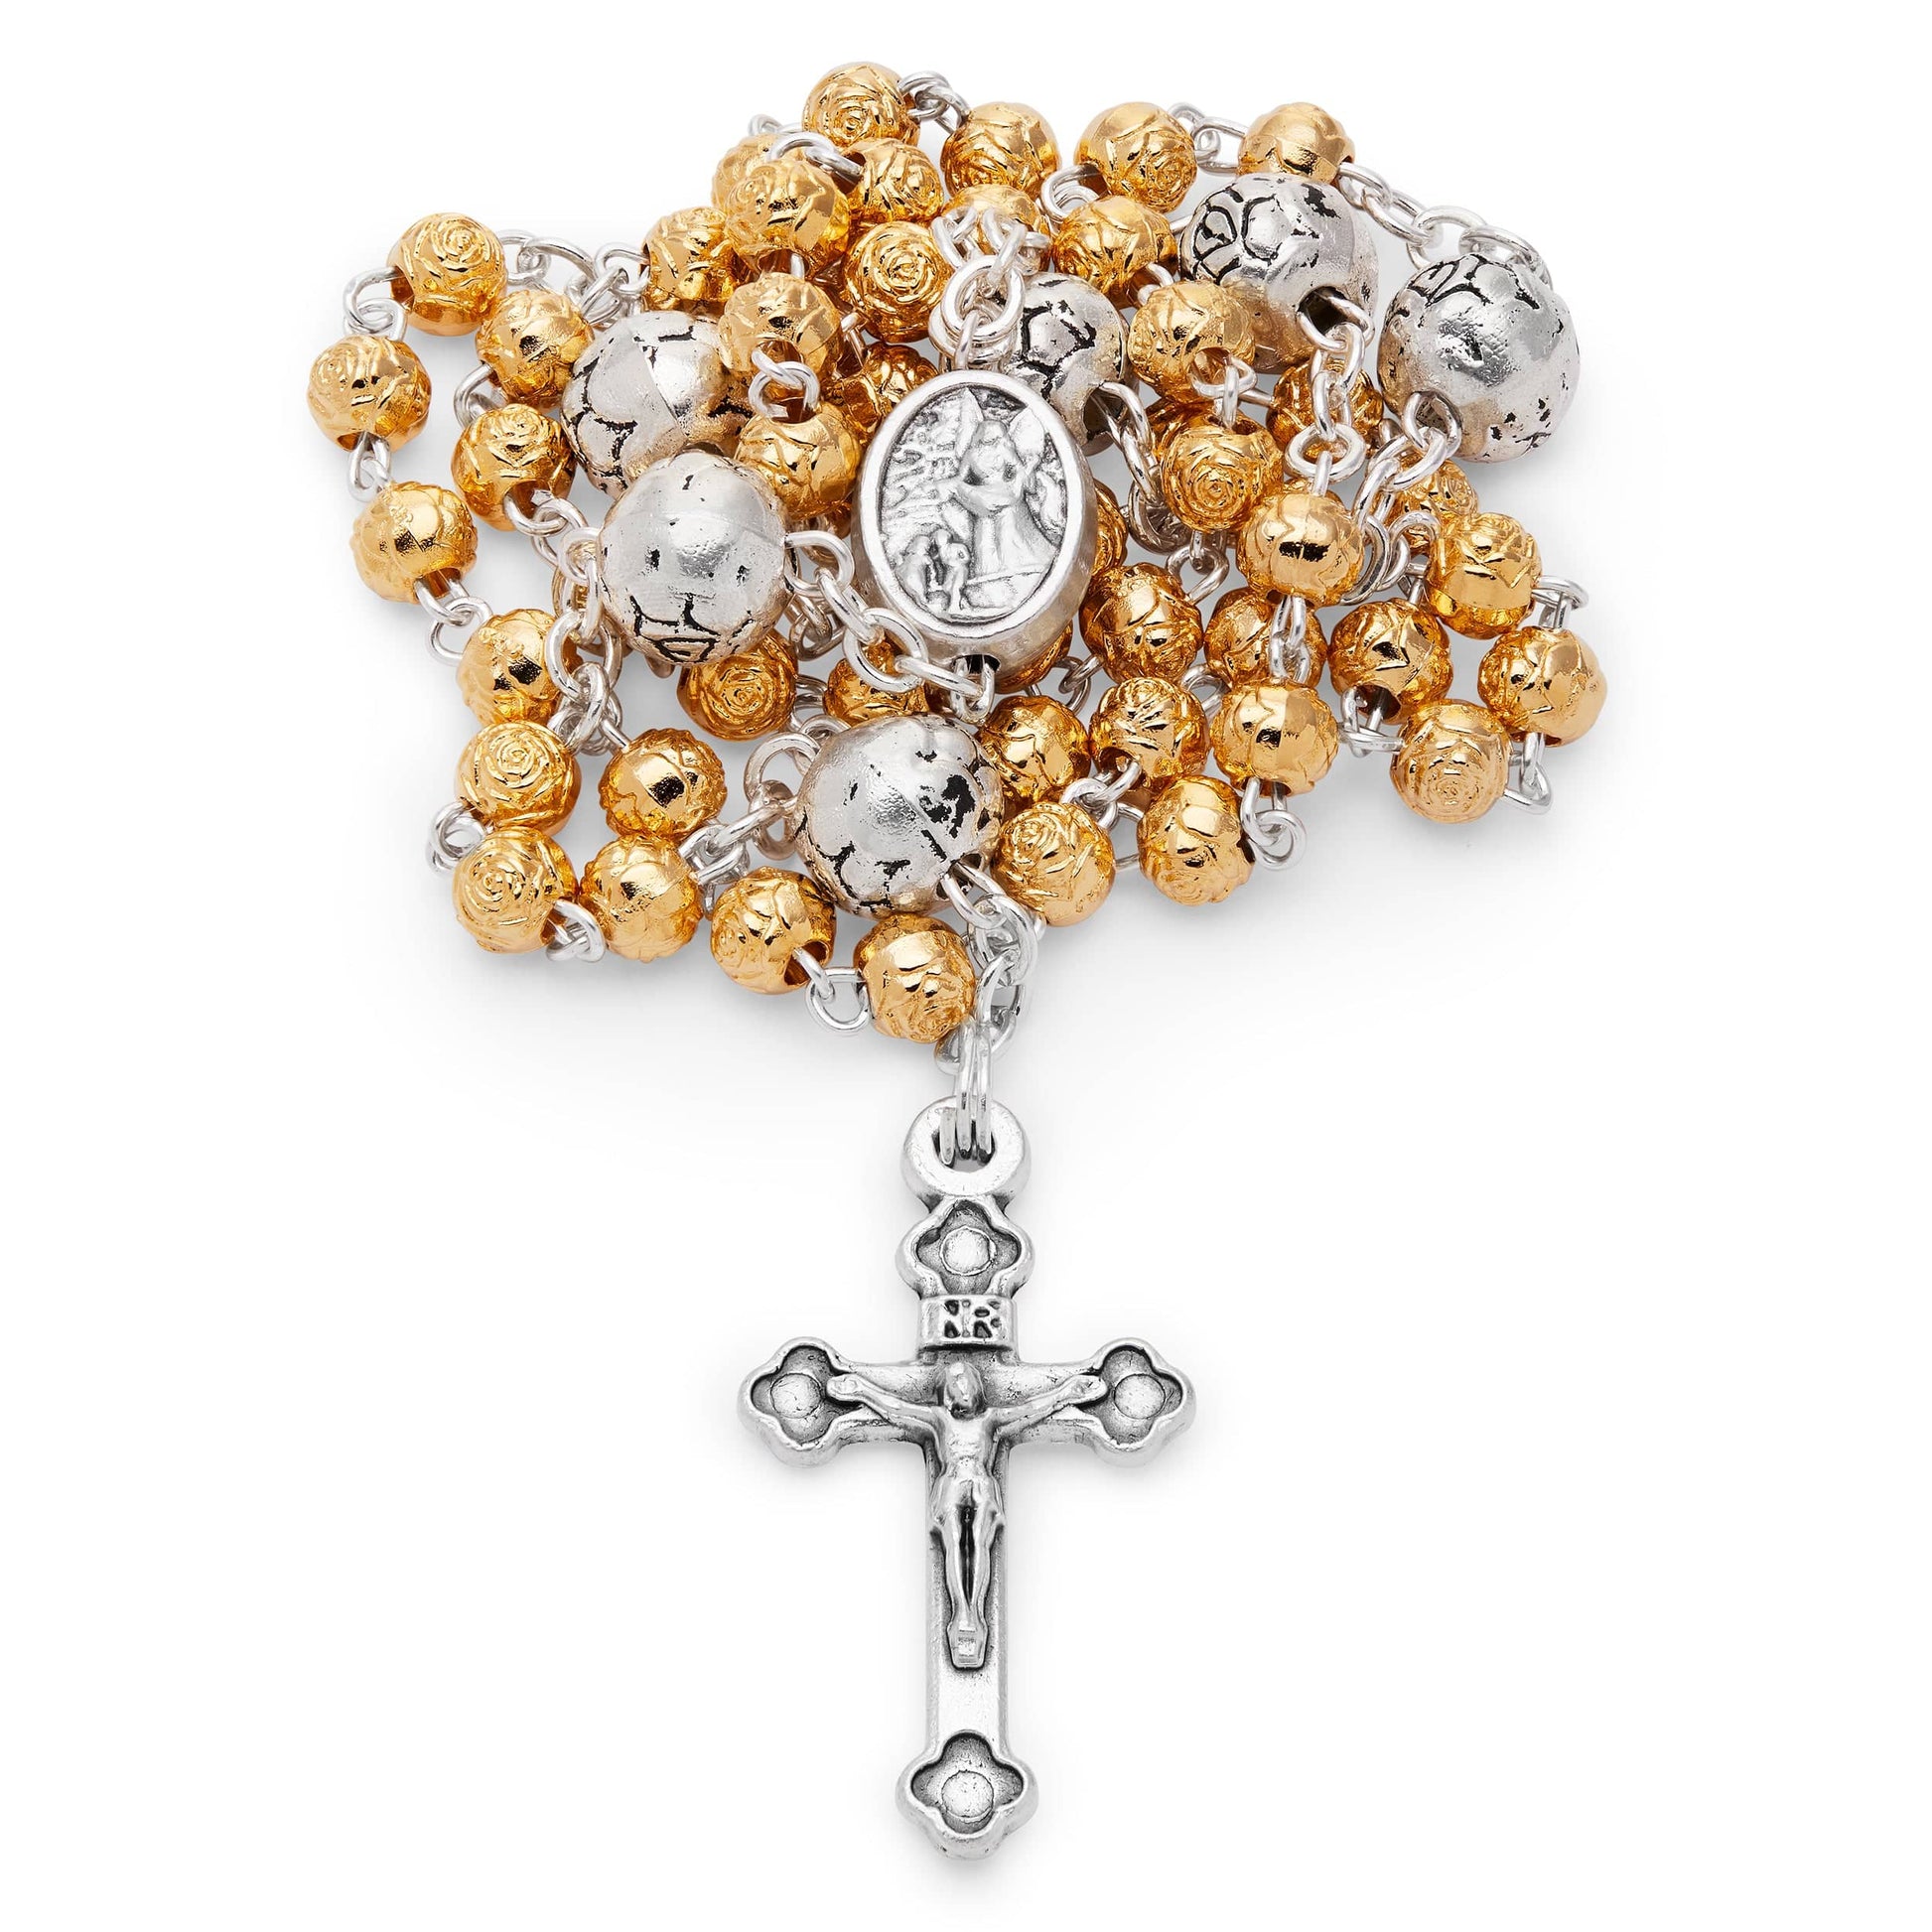 MONDO CATTOLICO Prayer Beads 32 cm (12.6 in) / 4 mm (0.15 in) Saint Michael Box and Rosary